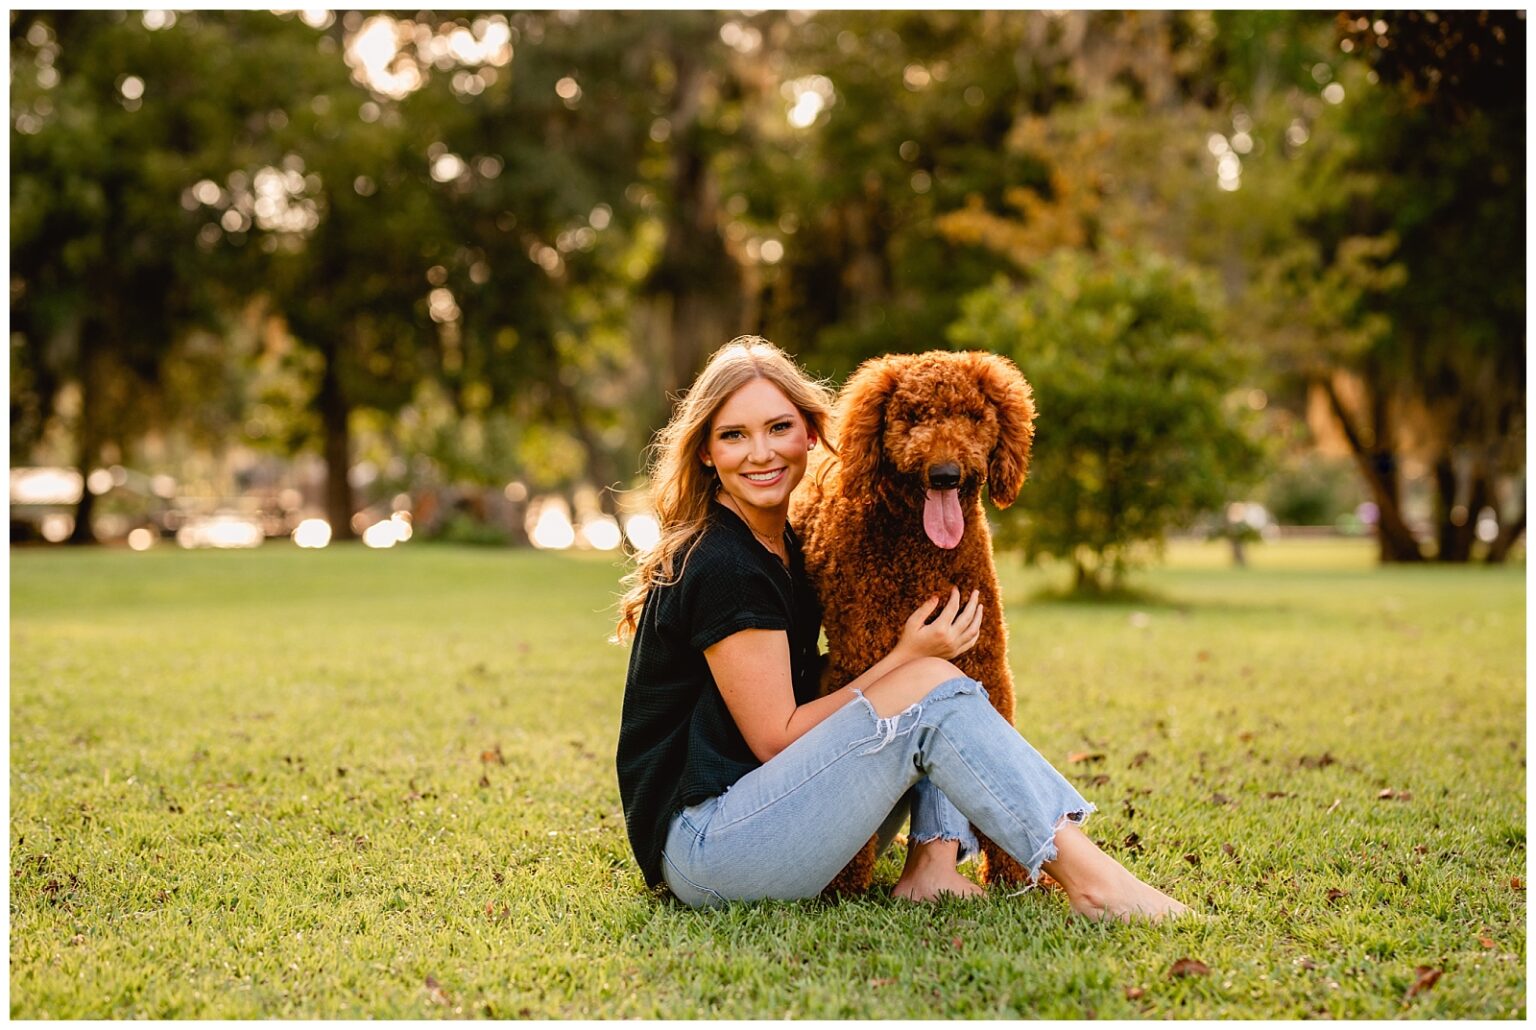 Senior Pictures in Thomasville, Georgia at the Rose Garden during sunset with girl's apricot Golden Doodle Dog.